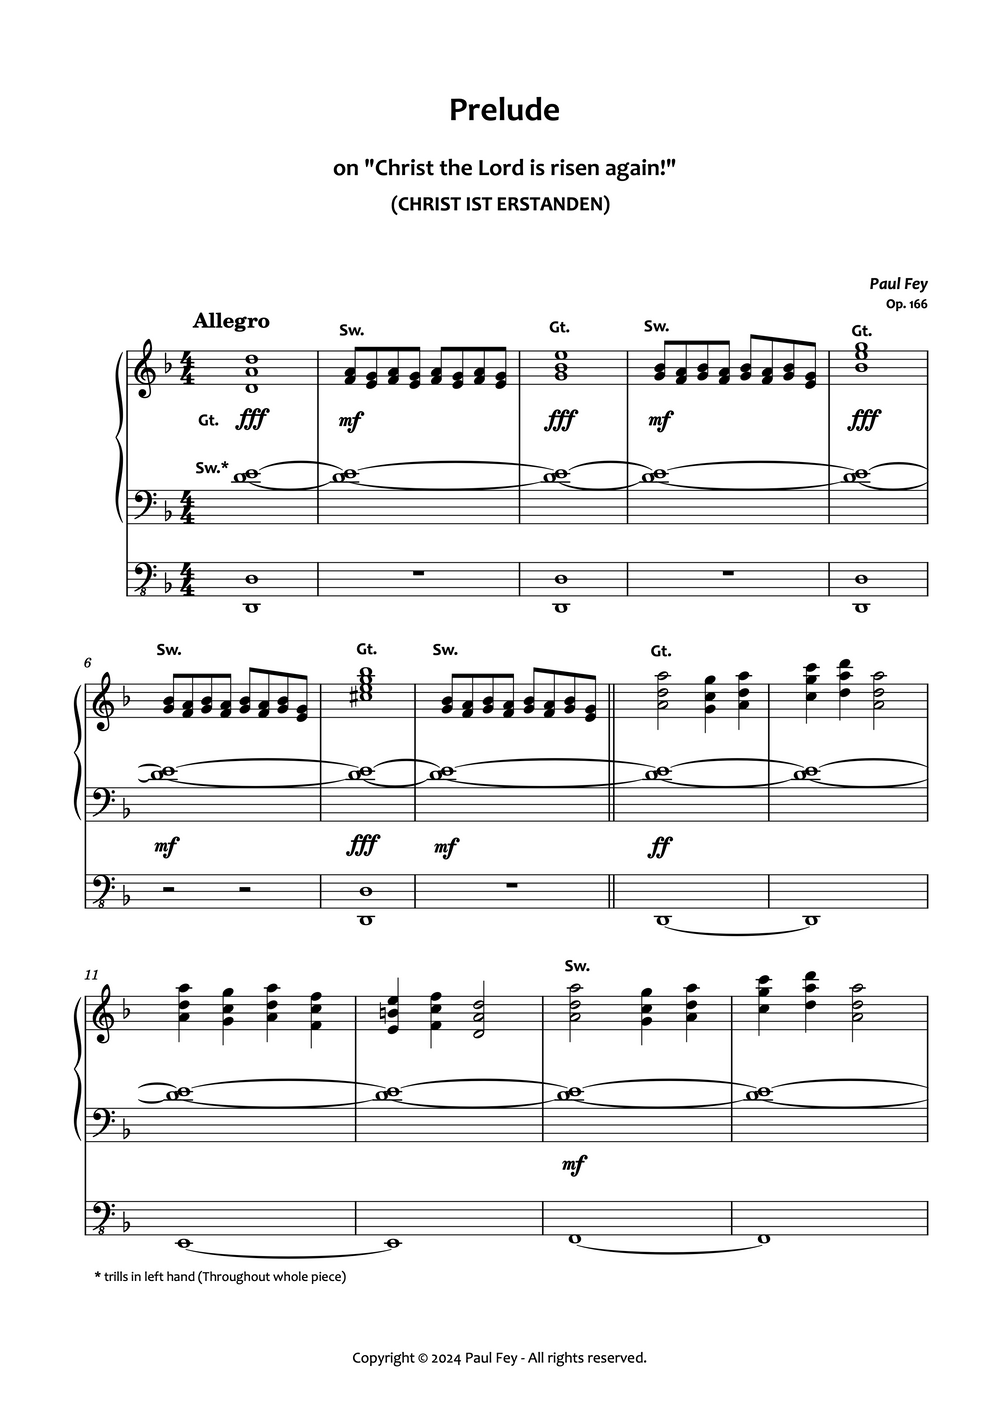 Prelude on "Christ is Risen" (Sheet Music) - Music for Organ PDF Download